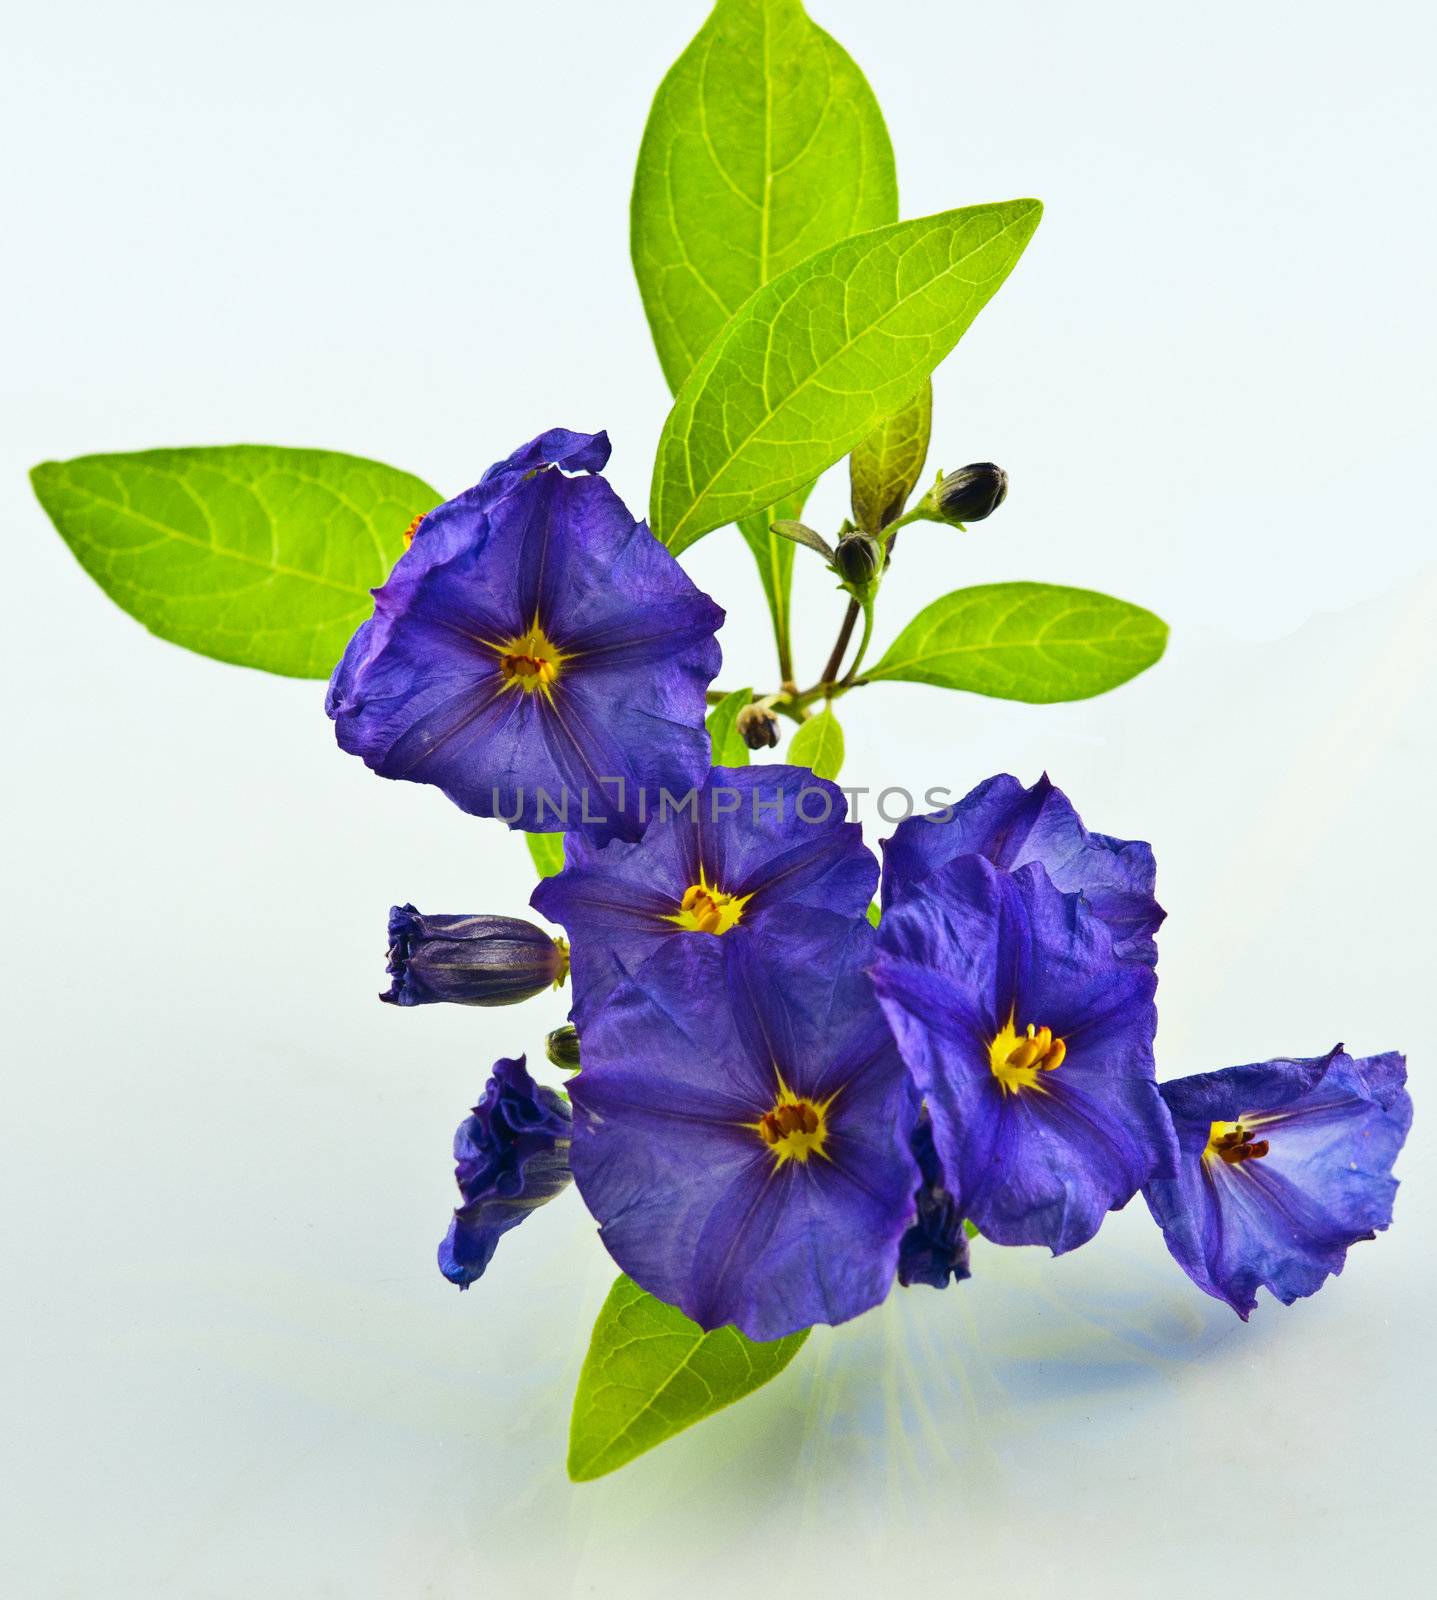 Purple flowers photographed against a white background with reflection